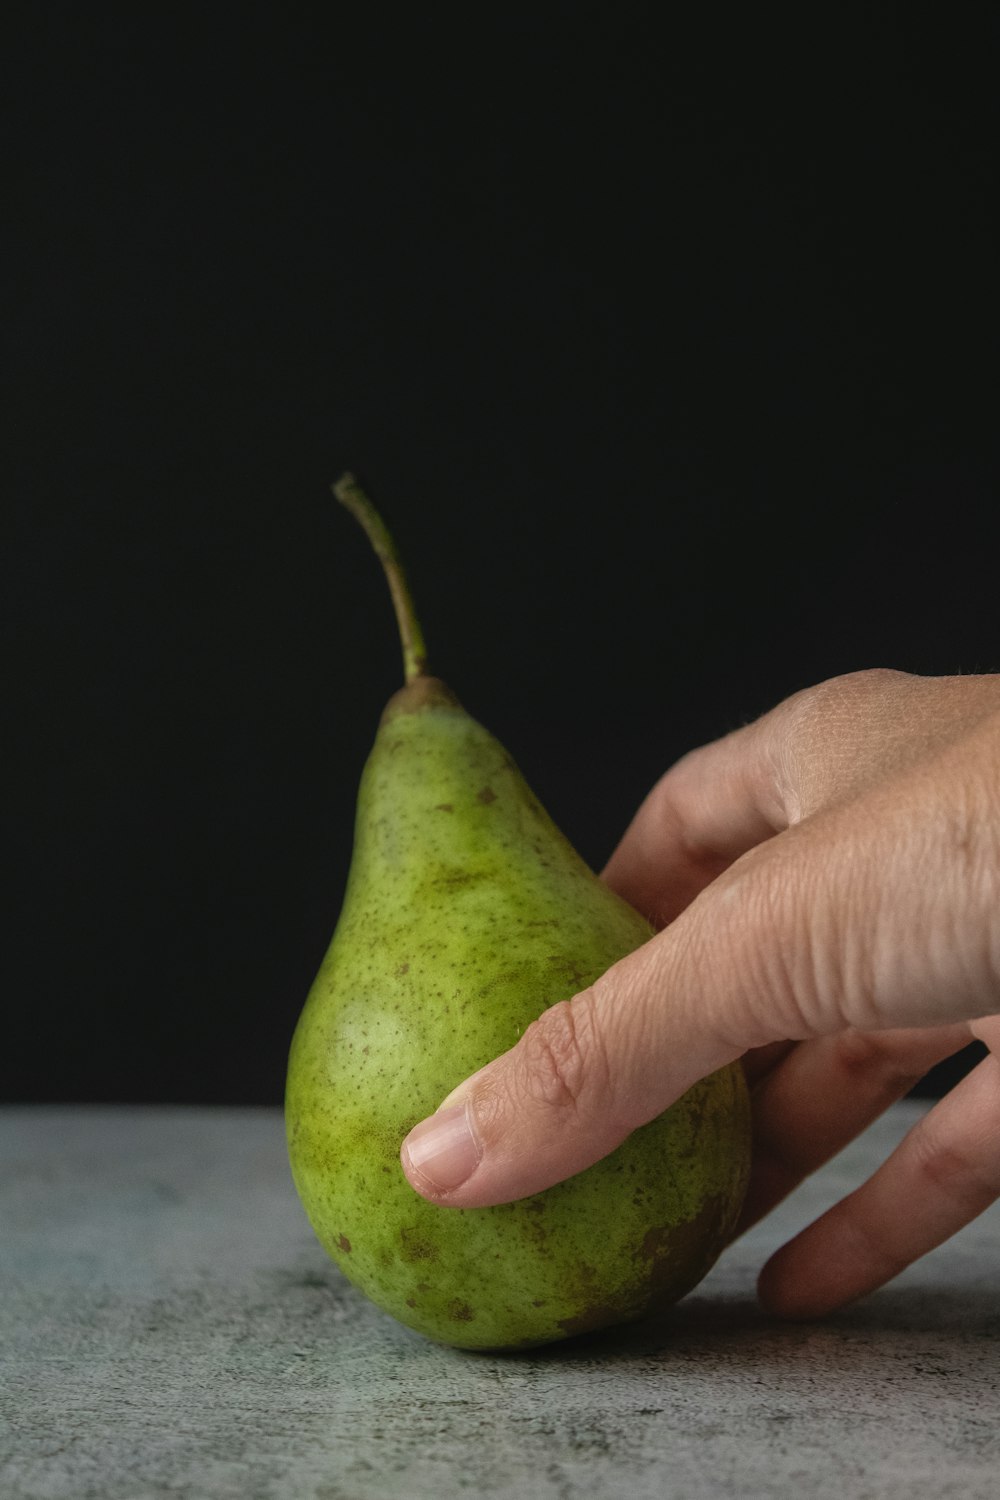 person holding green oval fruit